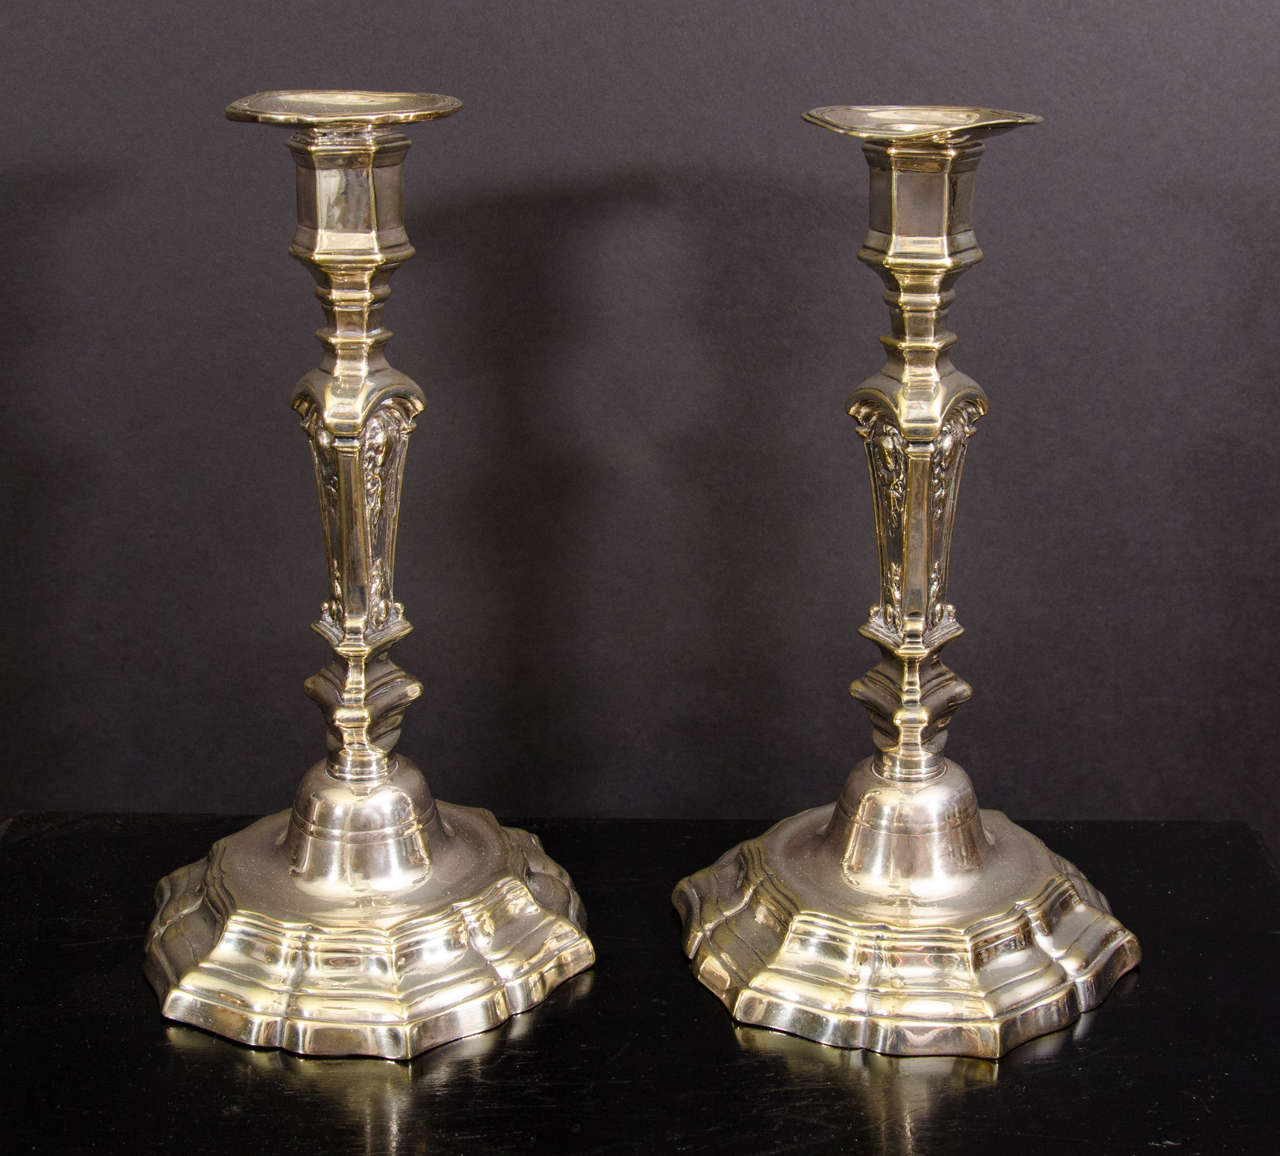 A fine pair of Louis XIV silvered bronze candlesticks in the Boulle manner.